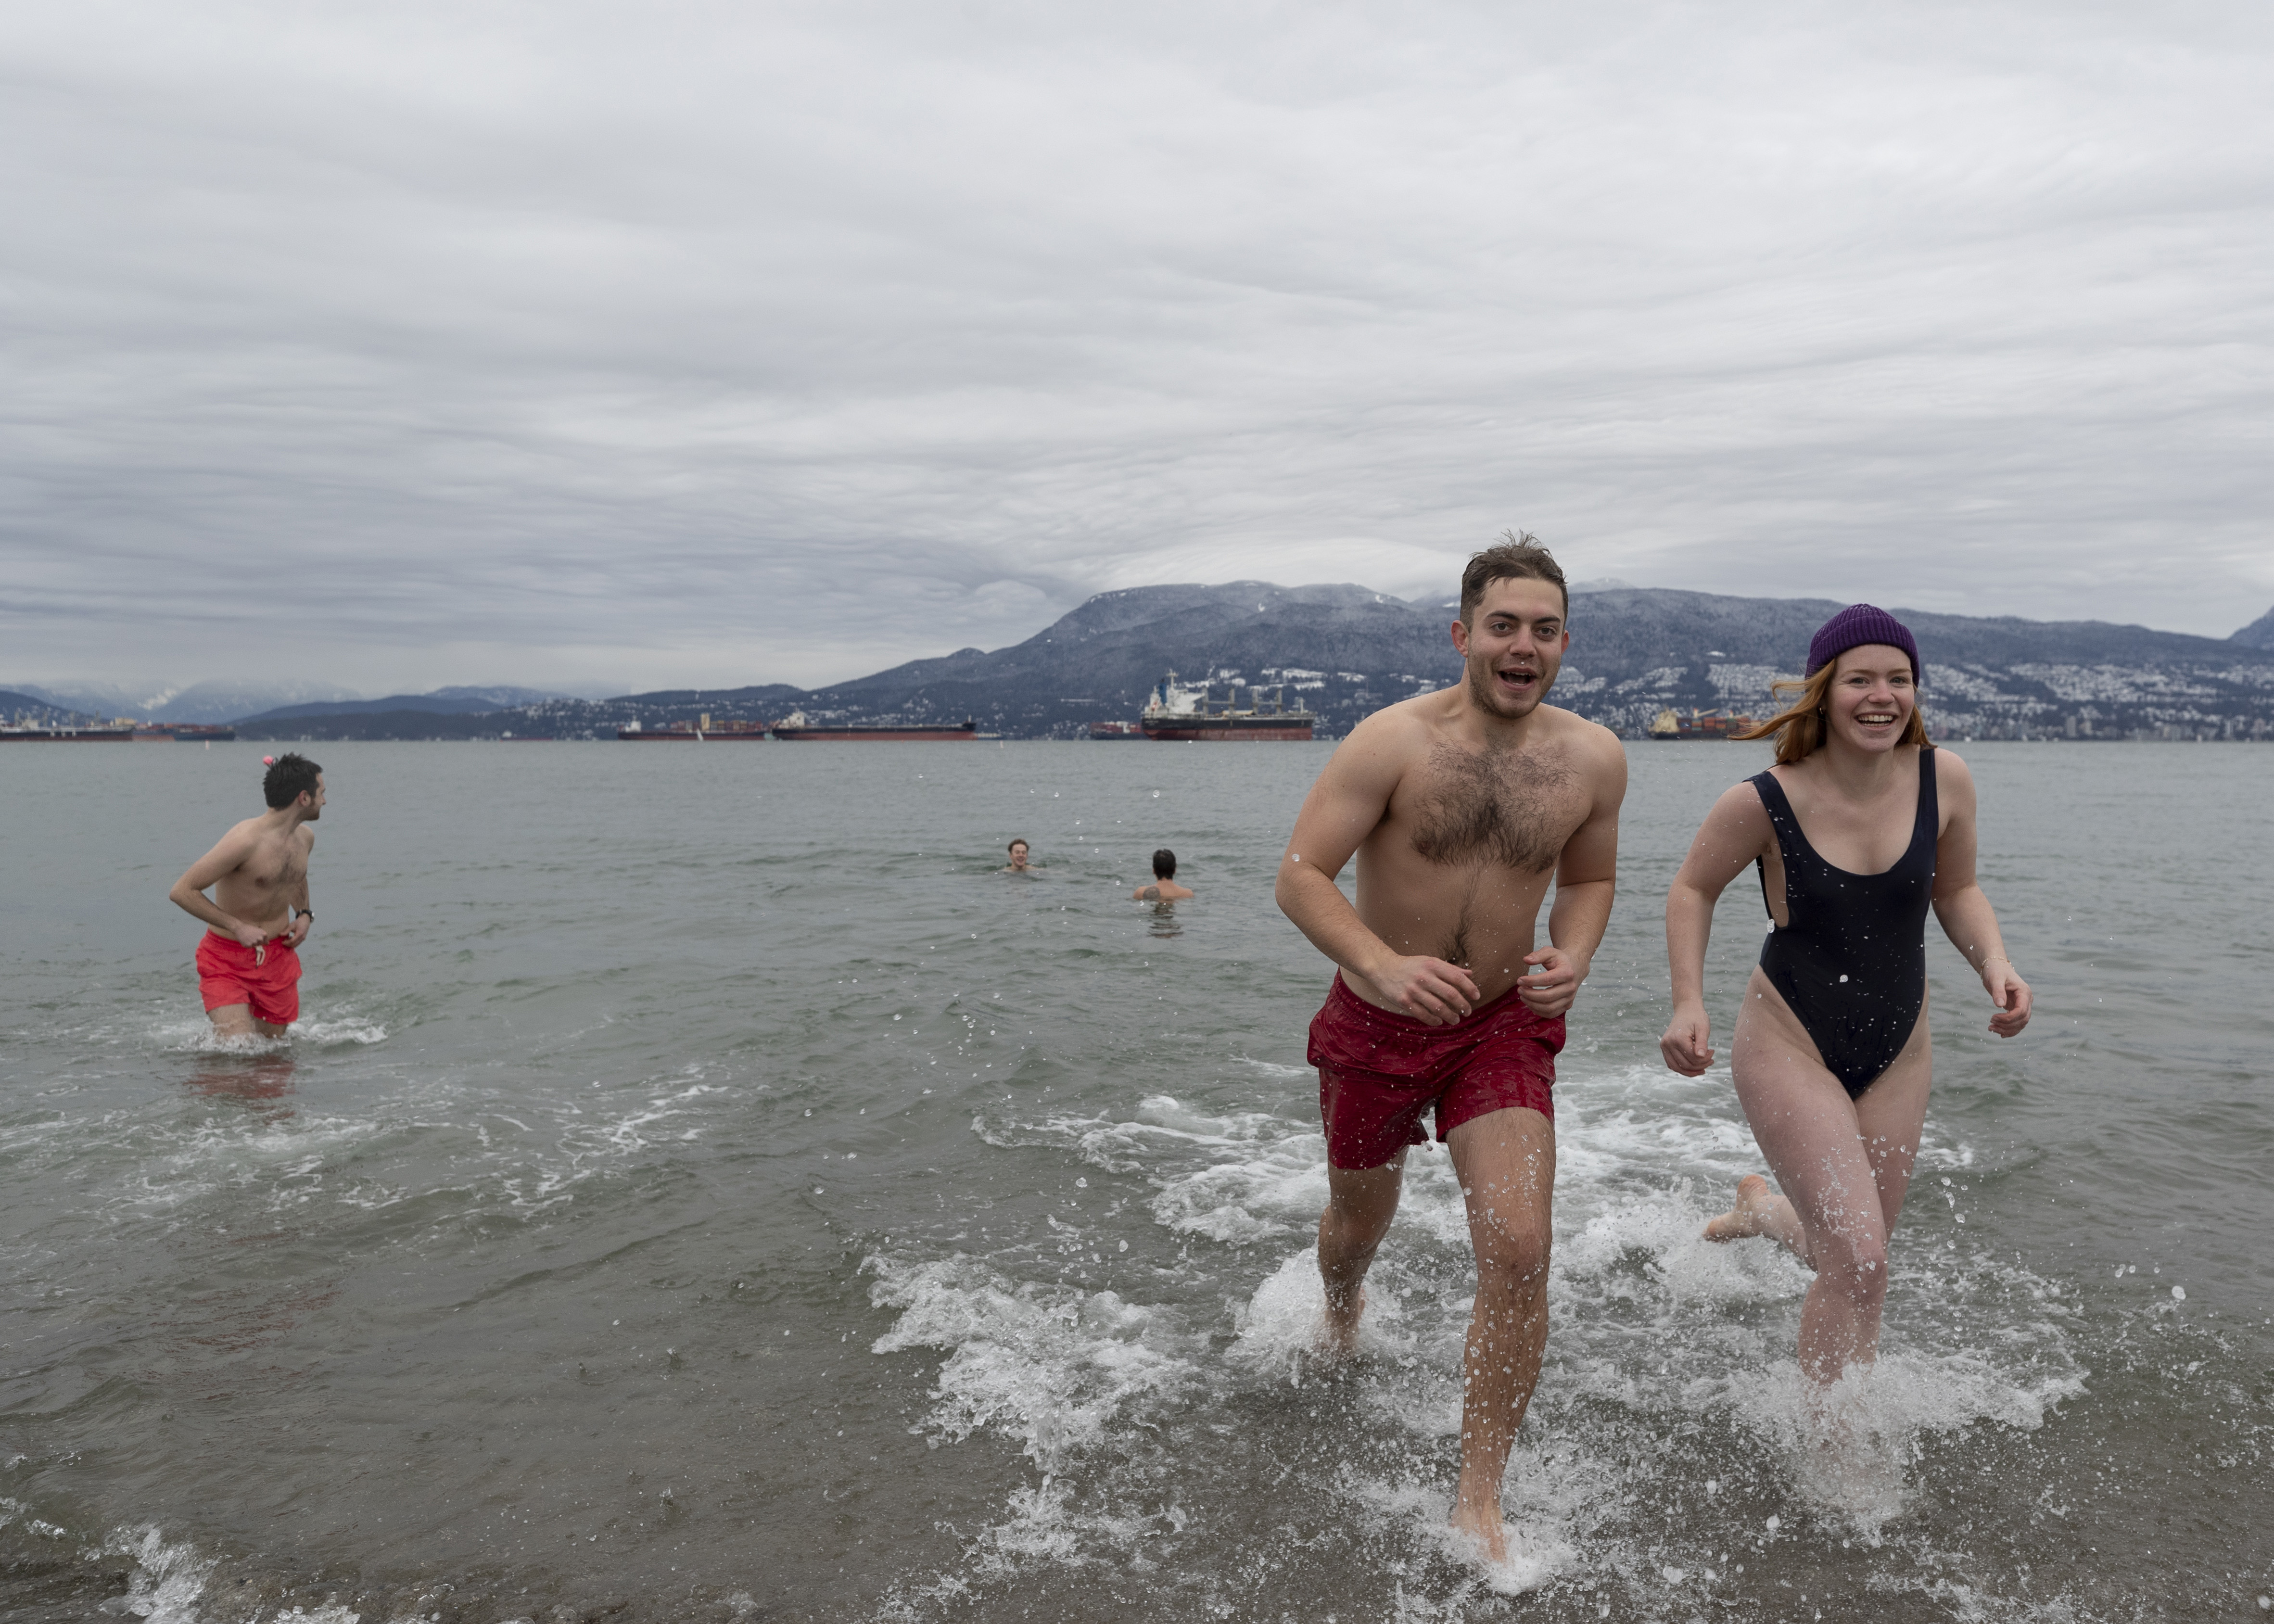 VANCOUVER, BRITISH COLUMBIA - JANUARY 01: A group of people take a New Year's Day dip at Jericho Beach on January 01, 2022 in Vancouver, British Columbia, Canada. As of December 20, 2021, the Provincial Health Officer (PHO) Dr. Bonnie Henry has suspended all organized gatherings amid surging cases of the Omicron variant. (Photo by Andrew Chin/Getty Images)